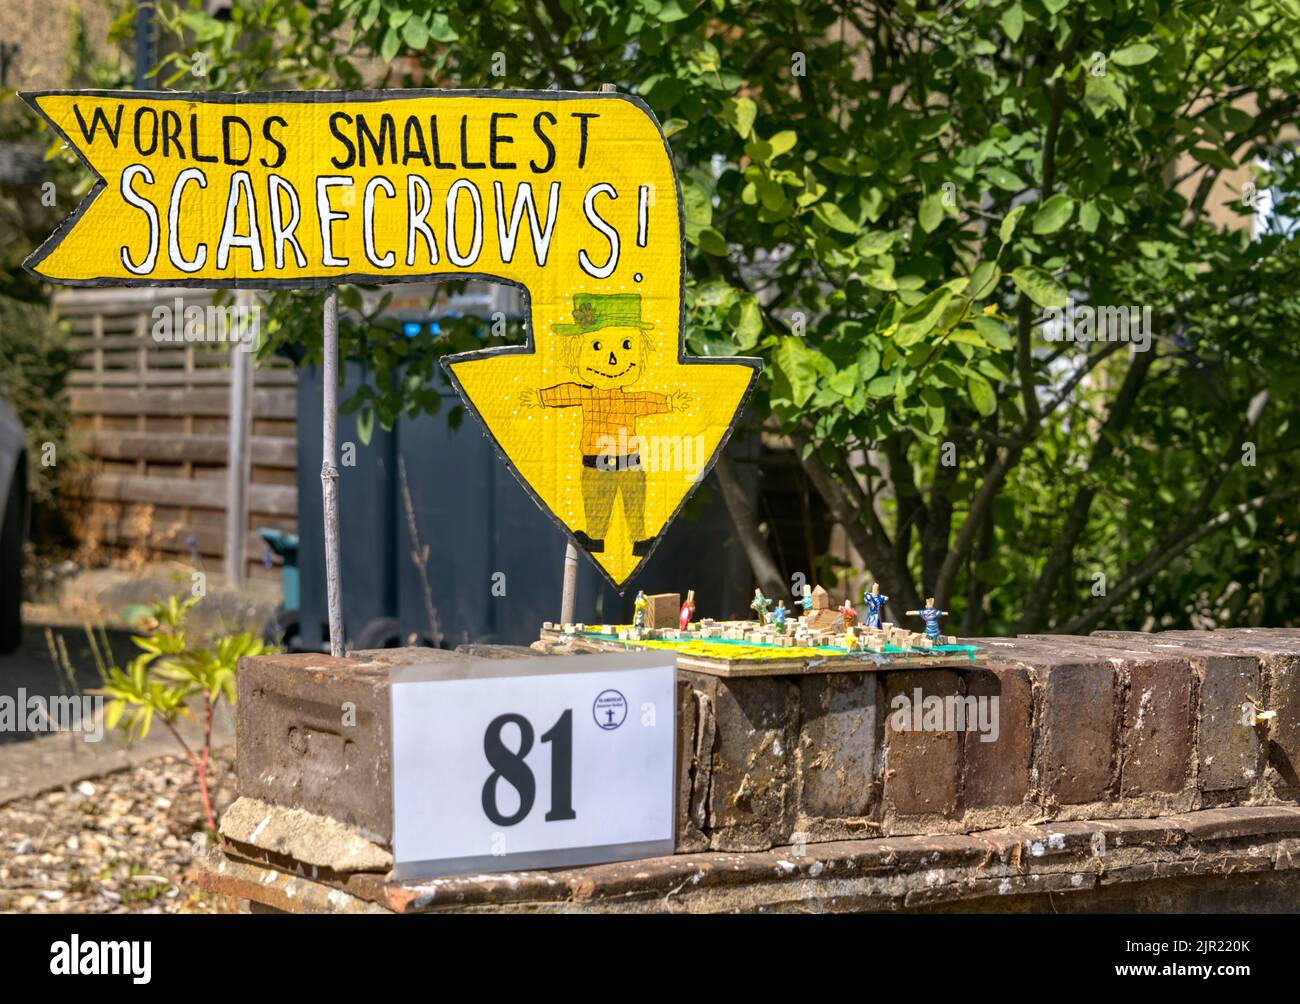 Flamstead scarecrow festival 2022, Flamstead, Herts Sign for Worlds Smallest Scarecrows Stock Photo